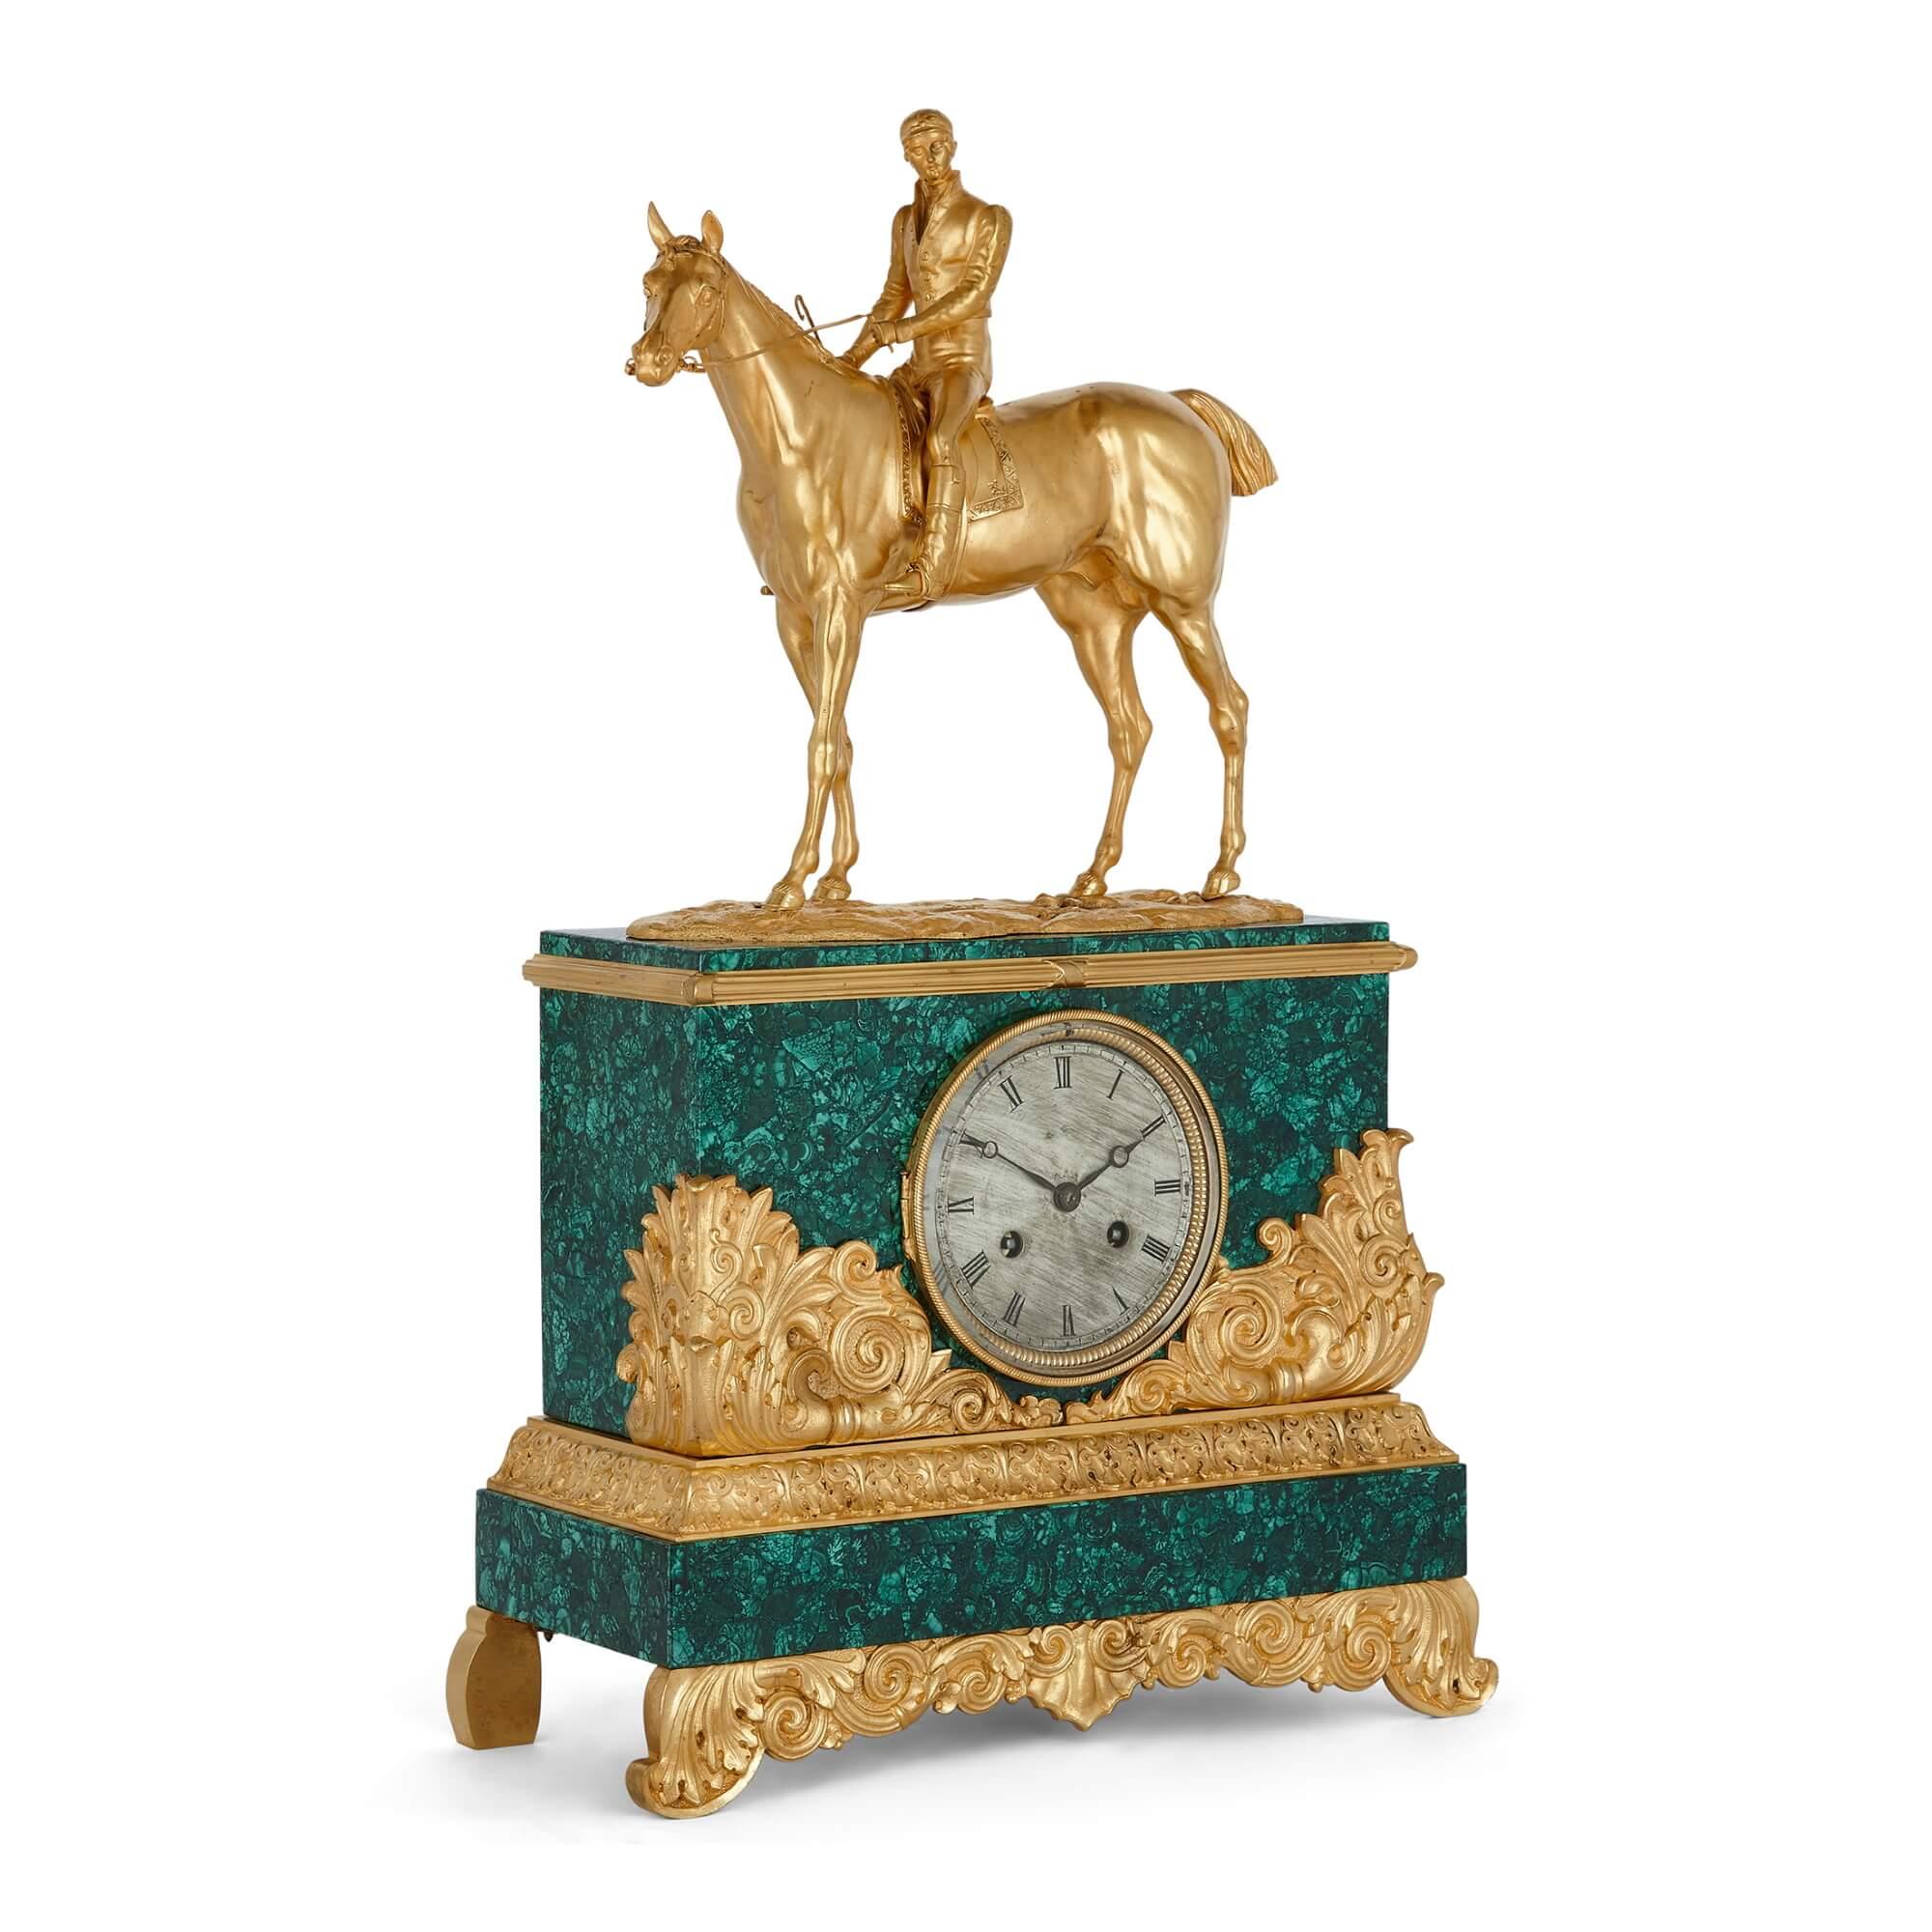 Charles X Style ormolu and malachite mantel clock with horse and jockey
French, 19th Century
Height 56cm, width 34cm, depth 14cm.

This exceptional piece is a fine ormolu-mounted and malachite mantel clock, with a movement made and stamped by